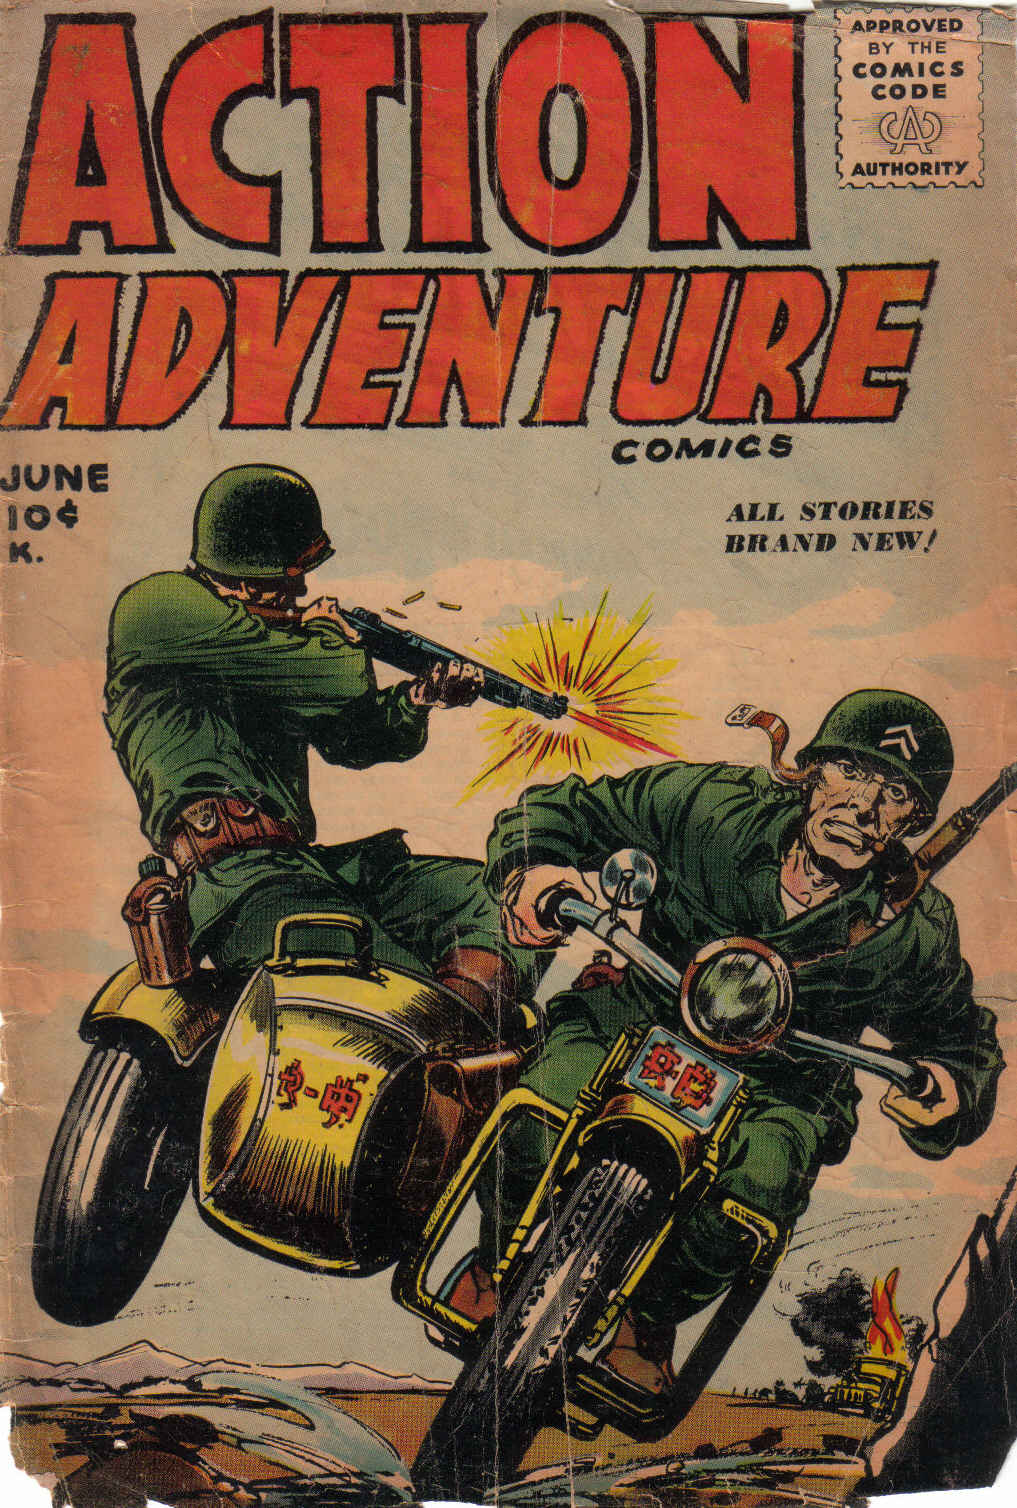 Book Cover For Action Adventure Comics 2 - Version 1